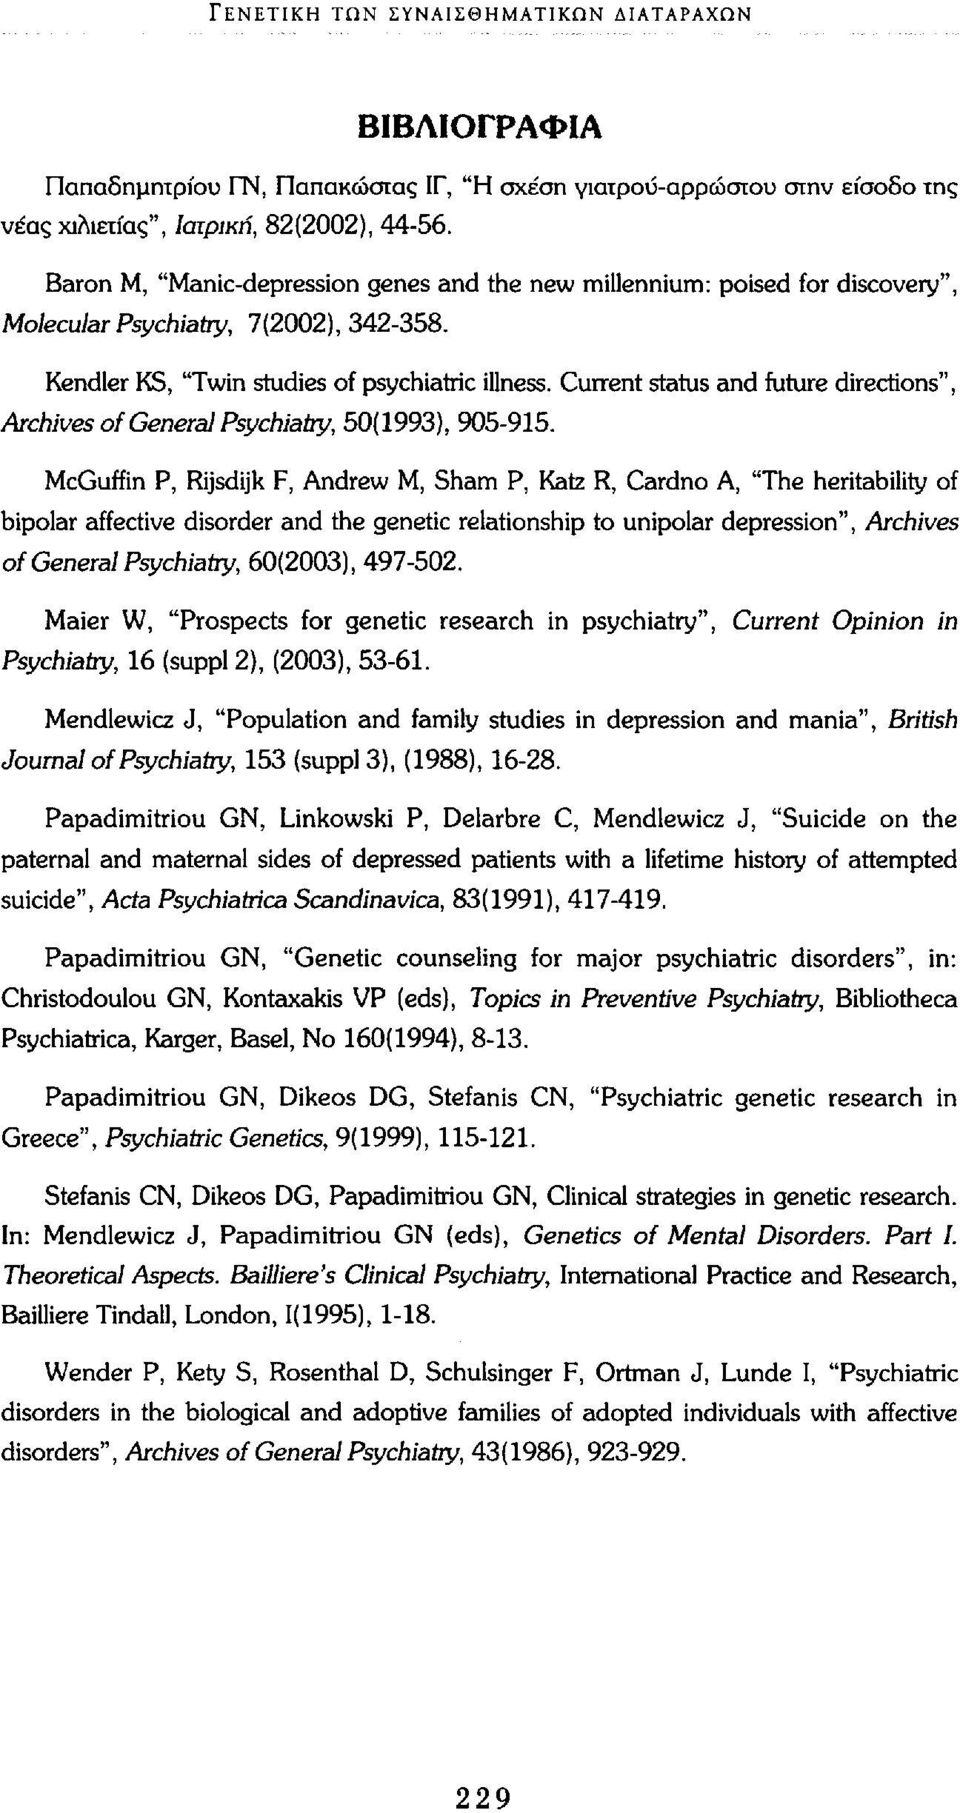 Current status and future directions", Archives of General Psychiatry, 50(1993), 905-915.